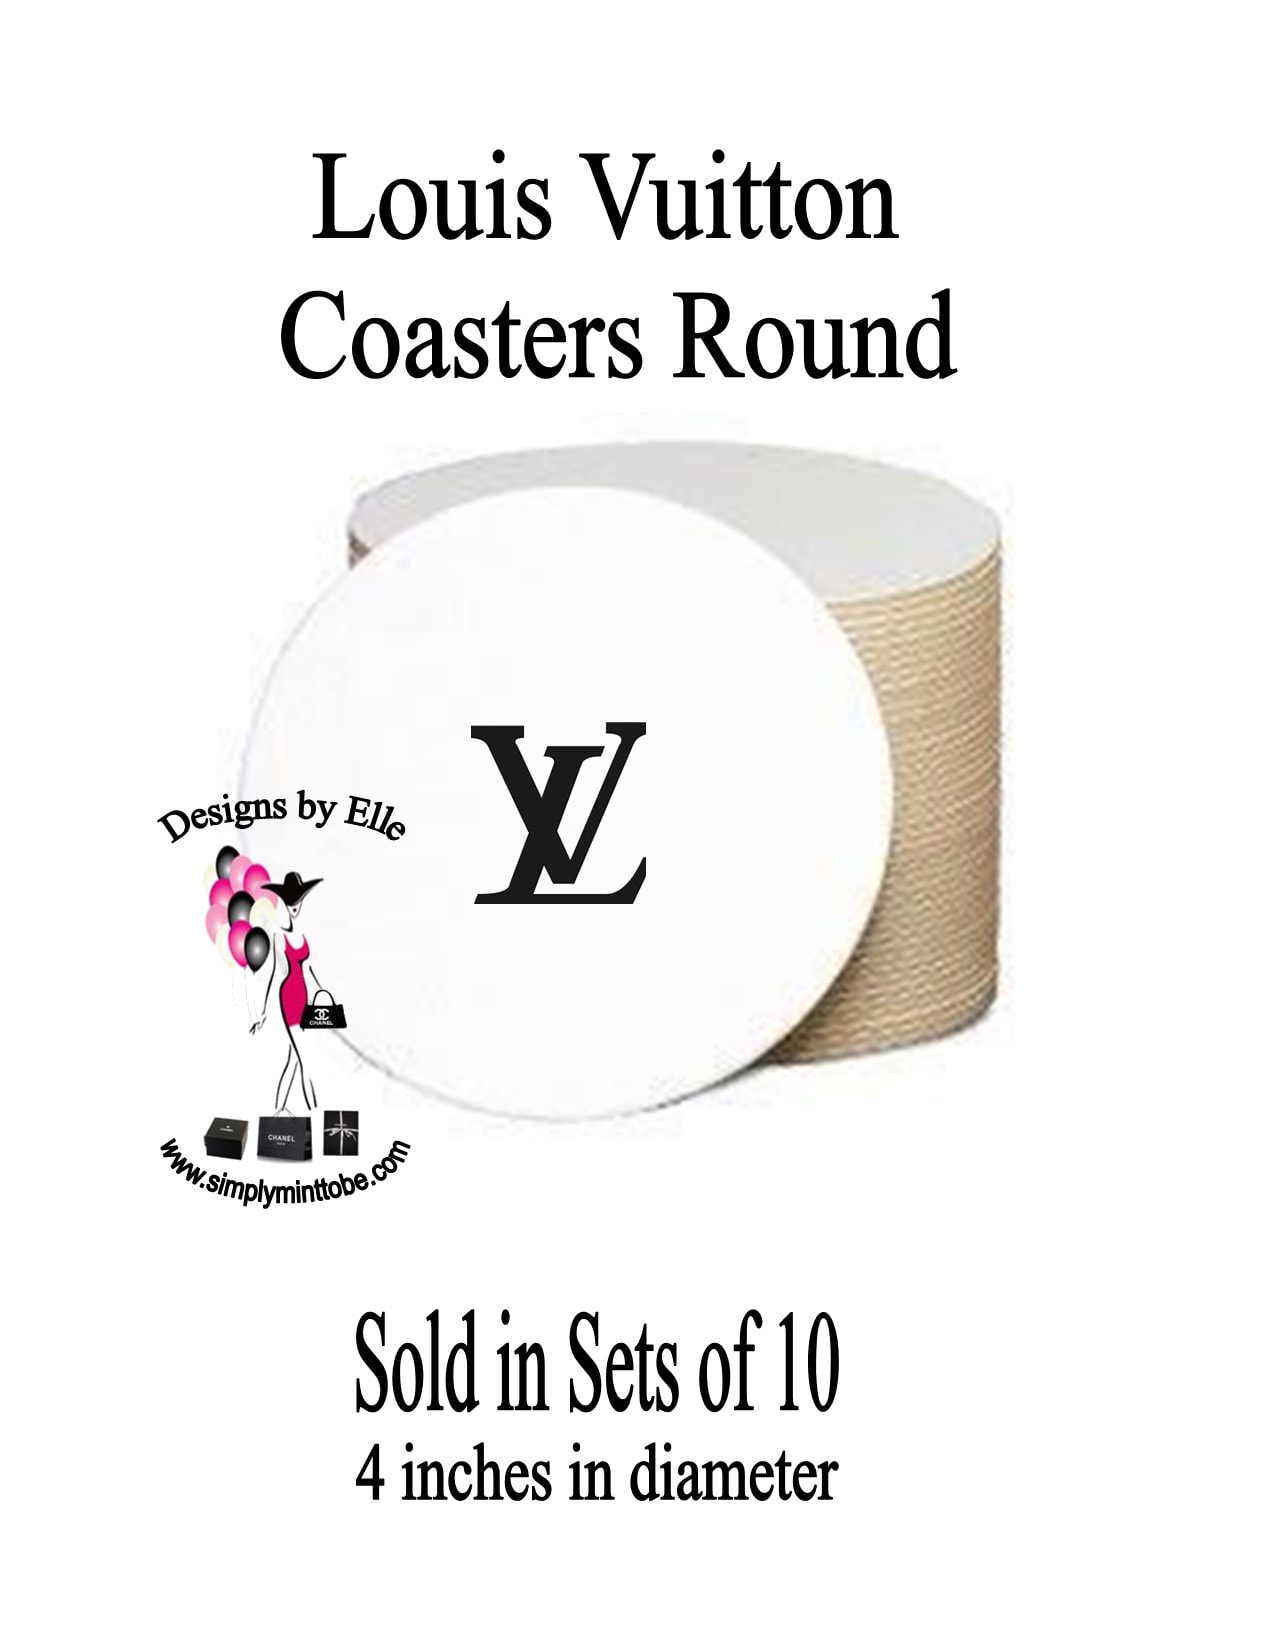 LV Louis Vuitton Inspired Drink Coasters with LV logo for all